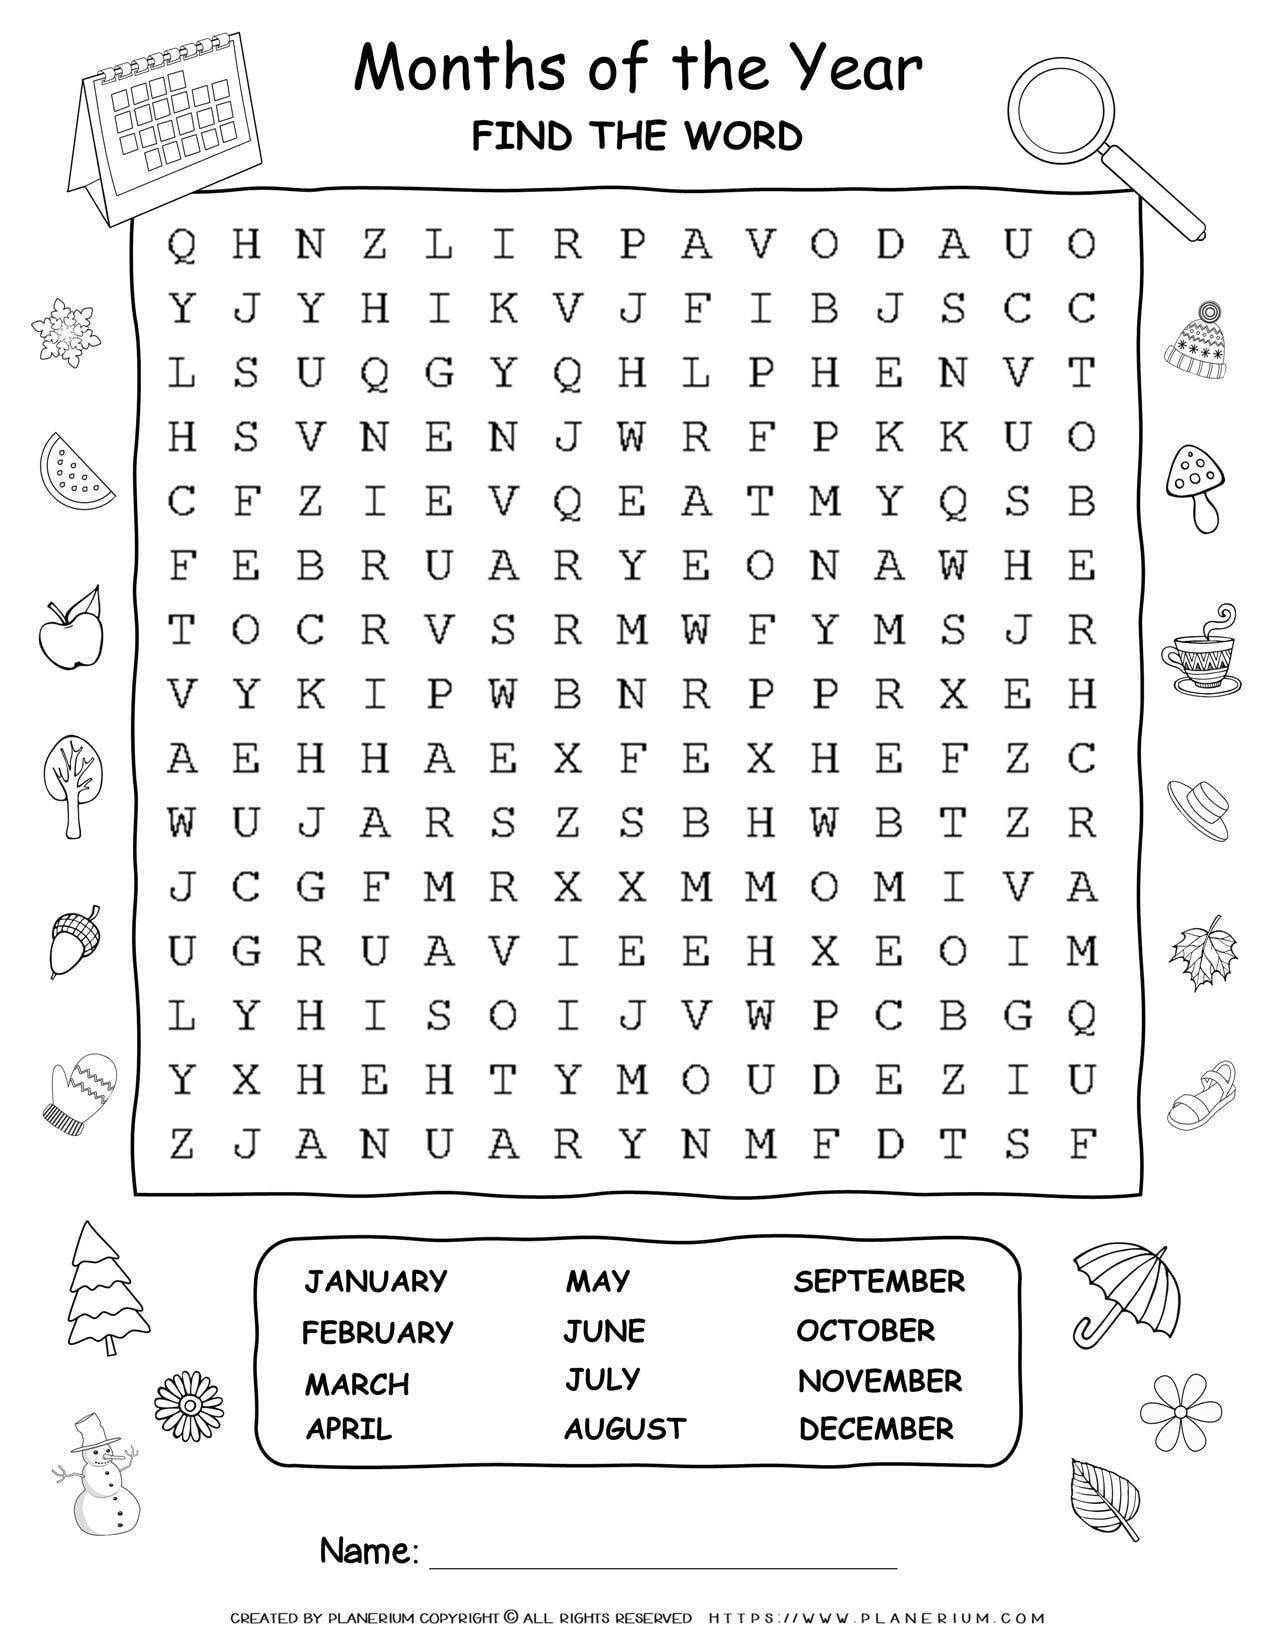 Months Of The Year - Word Search | Planerium